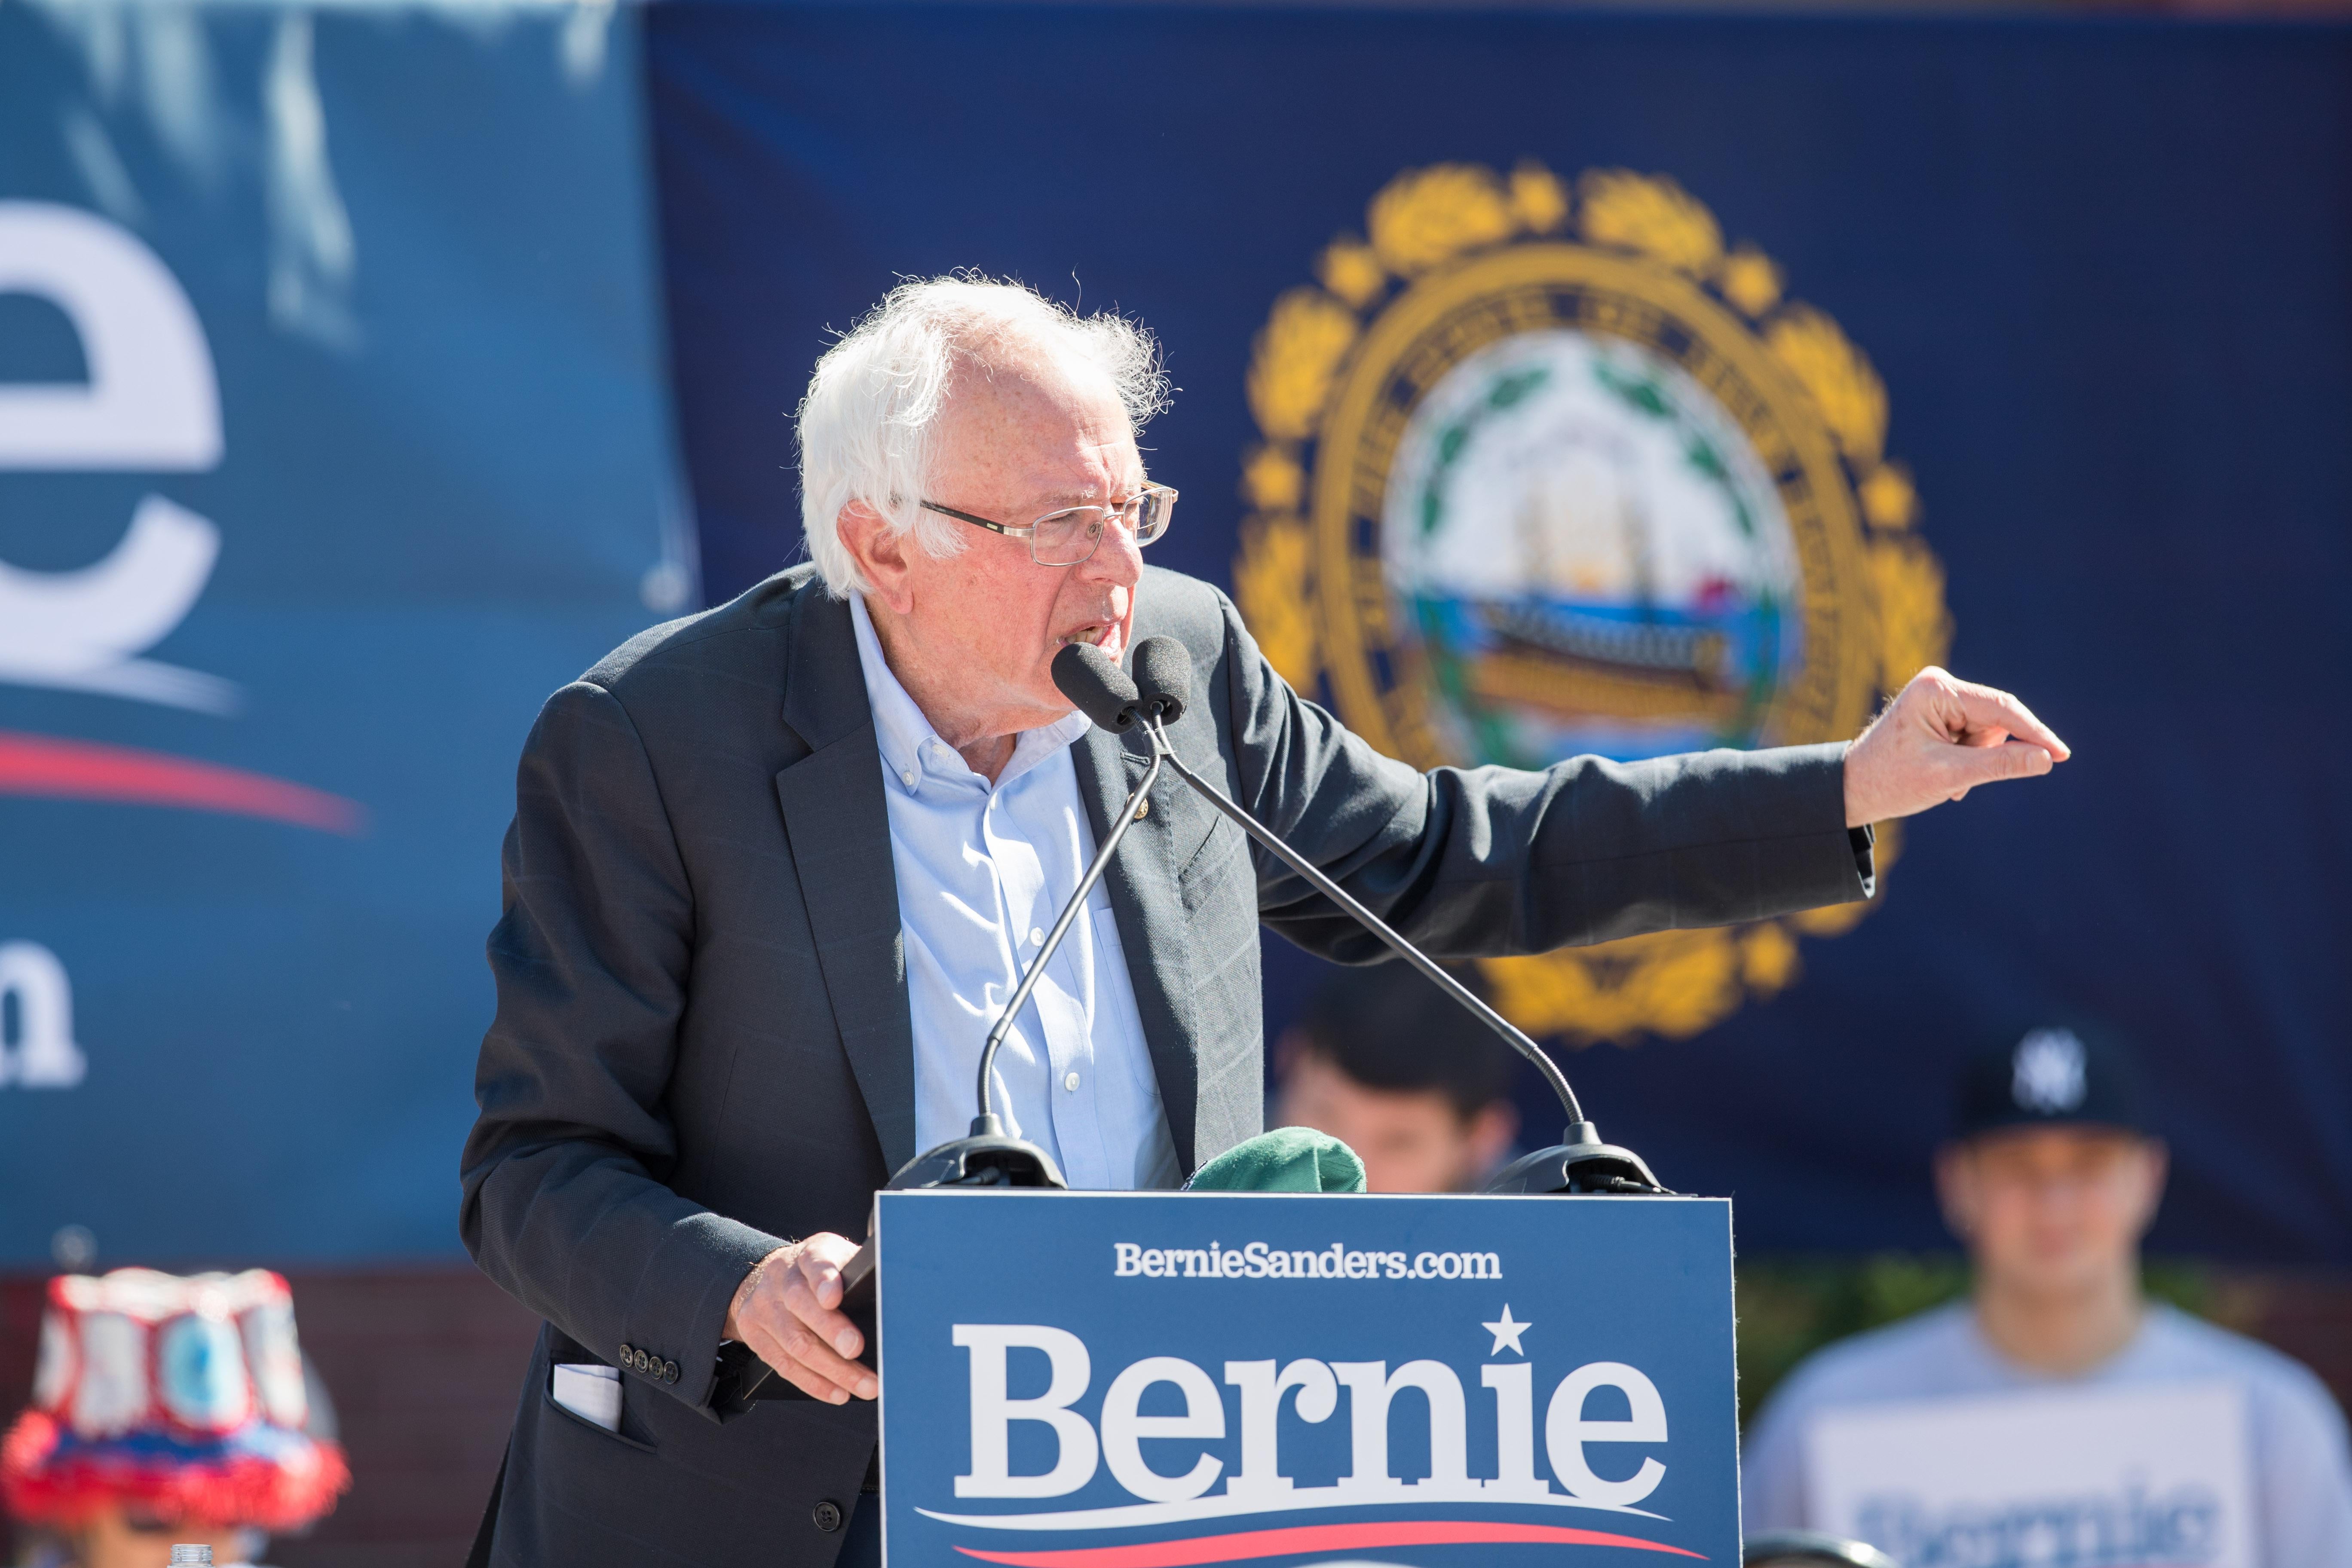 Bernie Sanders speaks from a podium at a political rally.